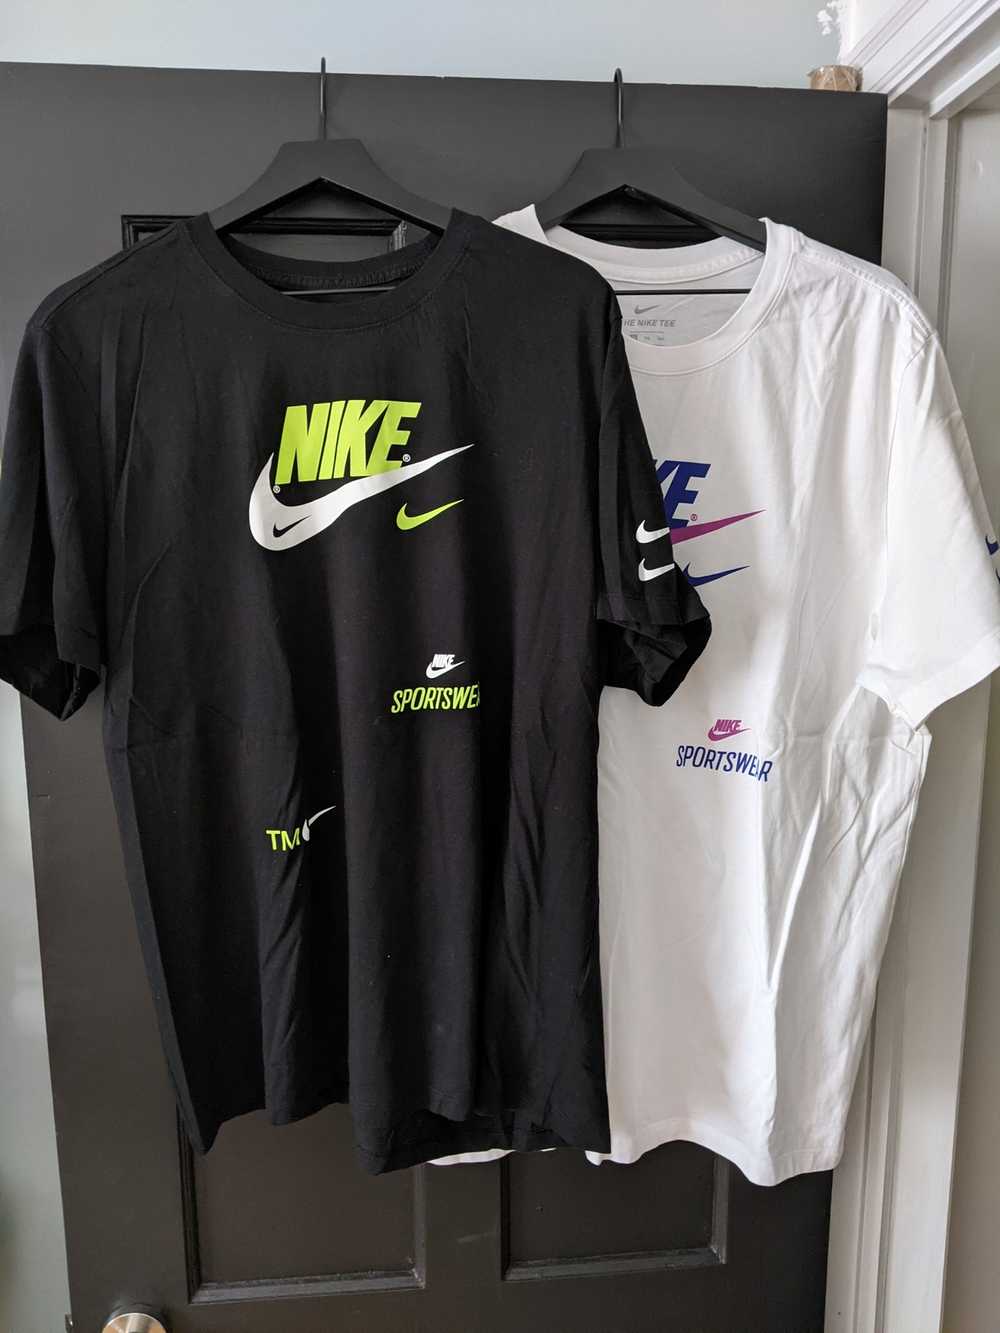 Nike 2-Pack "Over Branding" Nike Cotton T-Shirts - image 2